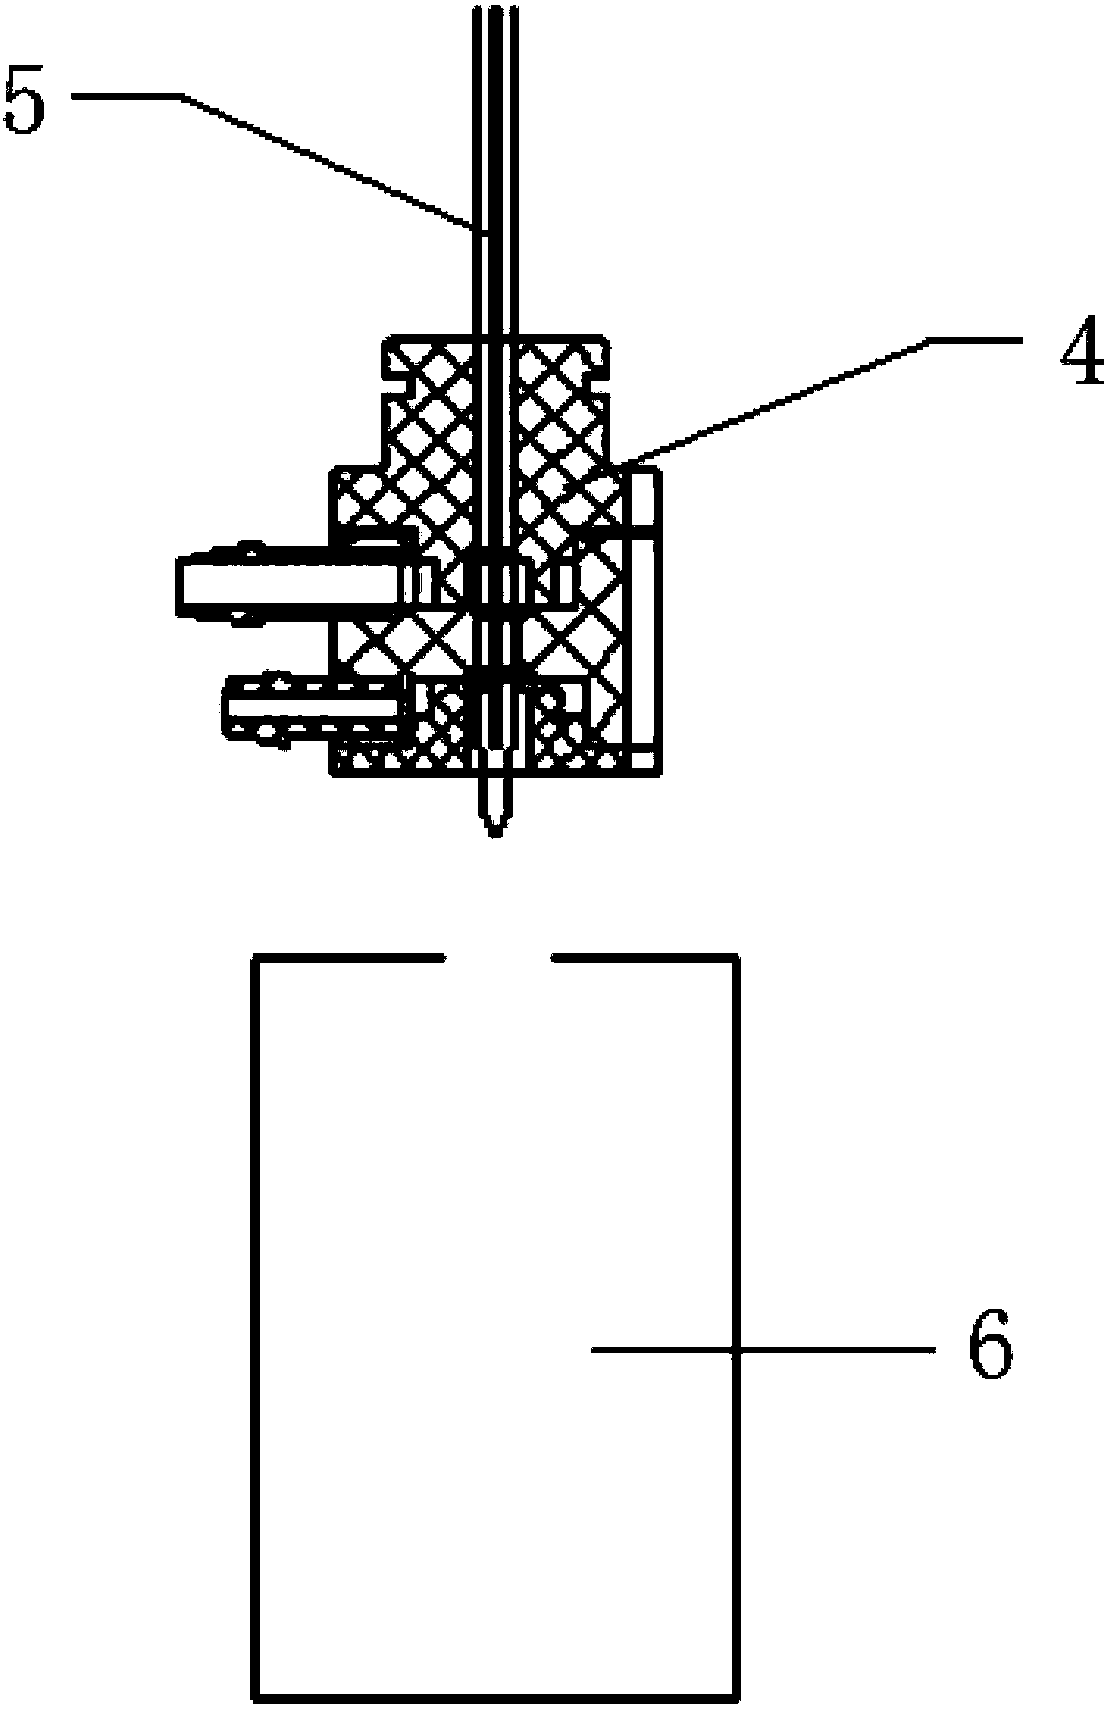 Liquid sampling device, blood cell analyzer and medical equipment